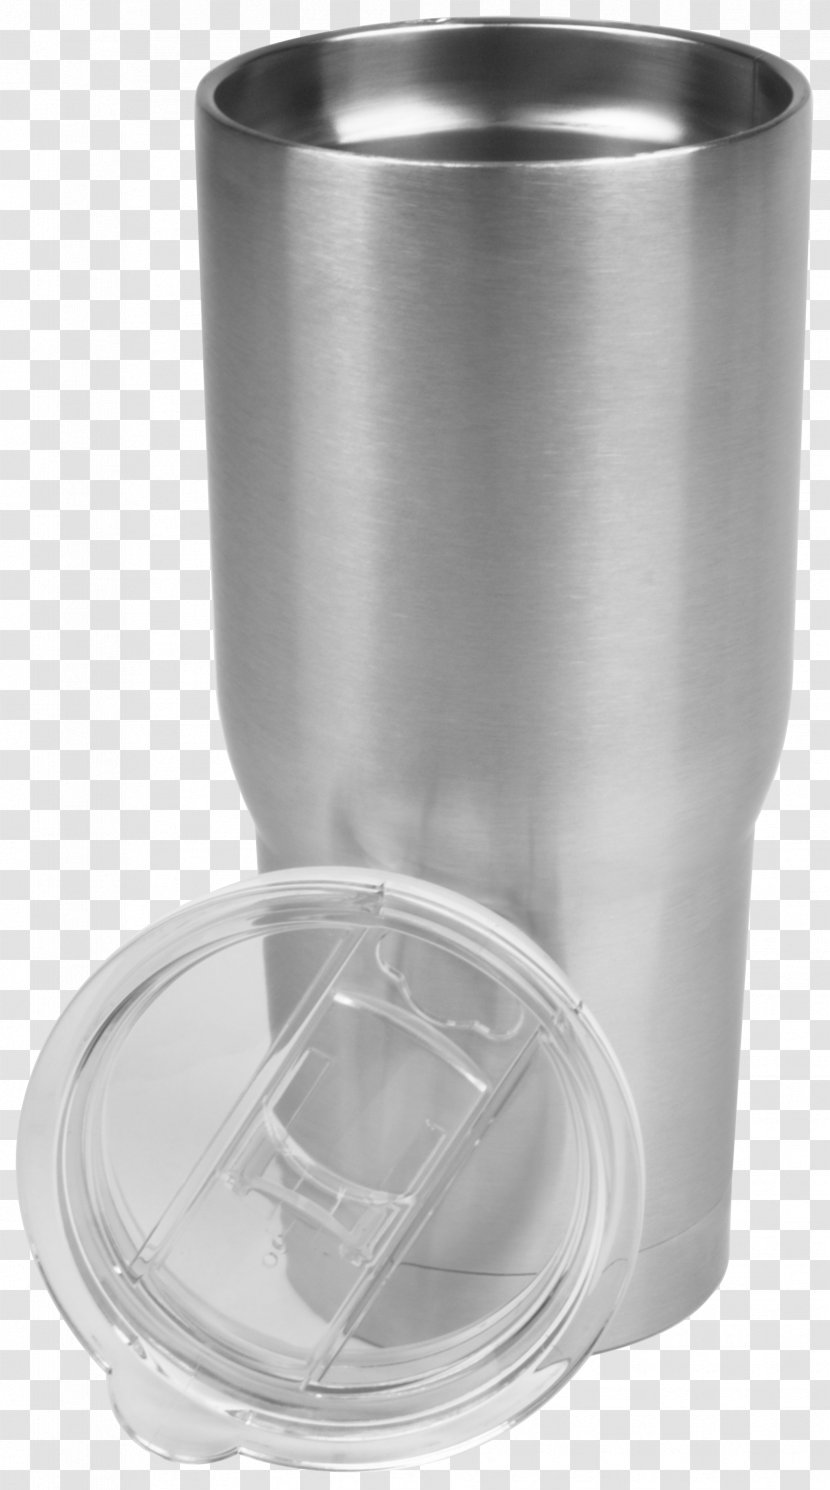 Tumbler Advertising Promotion Glass - Stainless Steel Transparent PNG